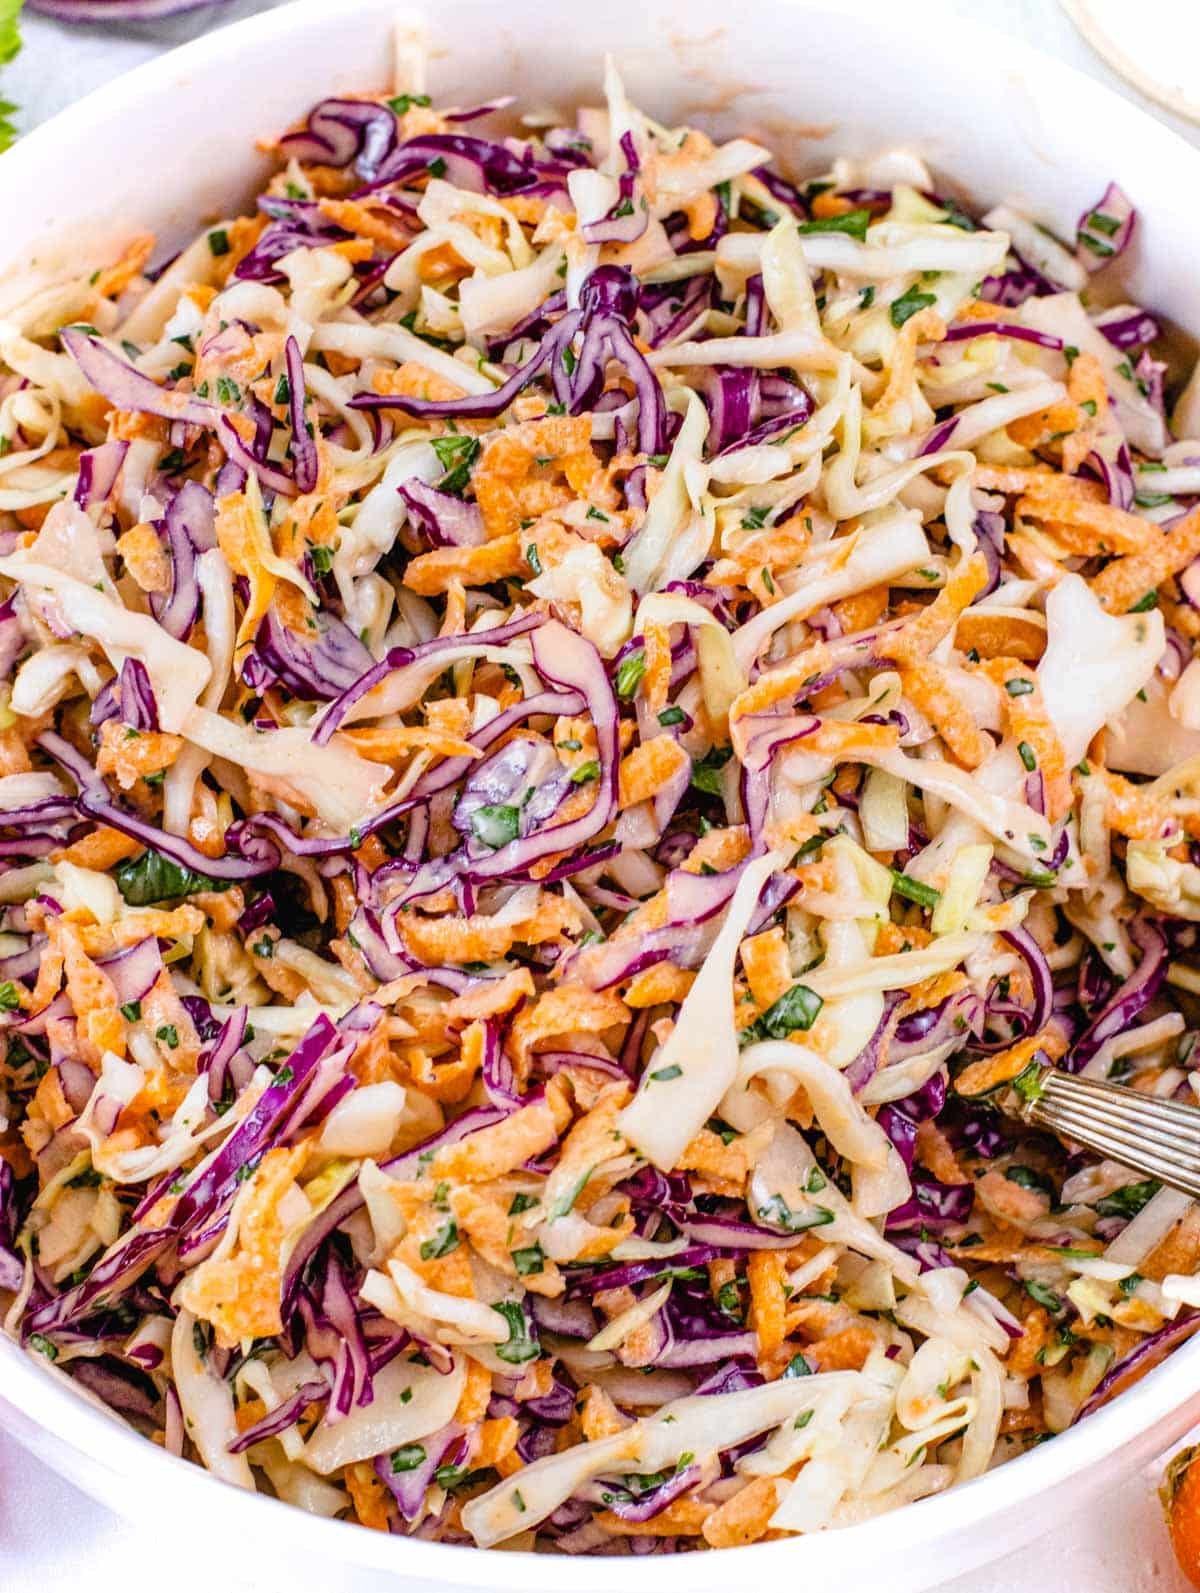 Coleslaw with carrot and red cabbage